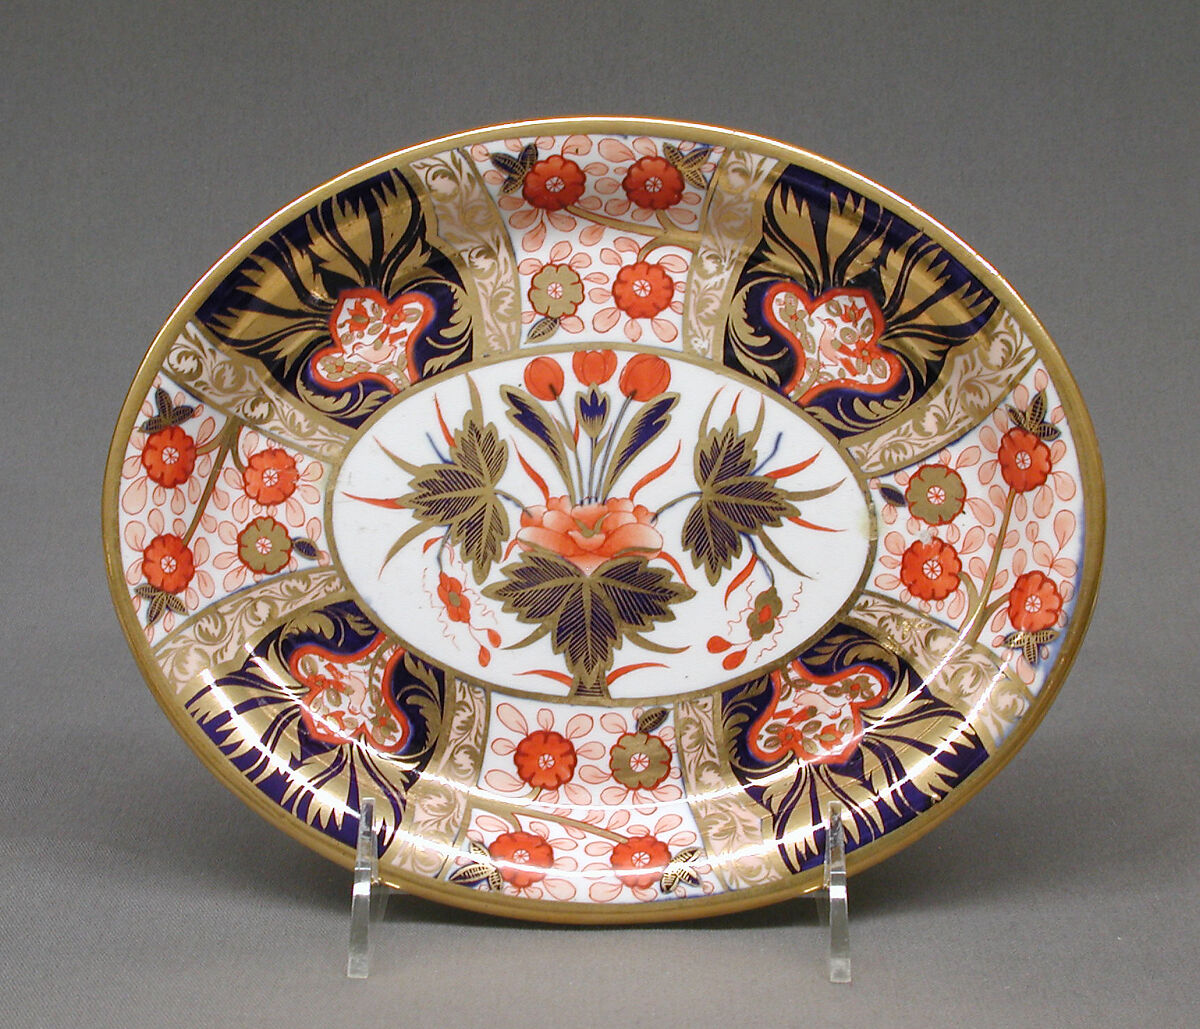 Tray (part of a service), J. Spode, Soft-paste porcelain, British, Stoke-on-Trent, Staffordshire 